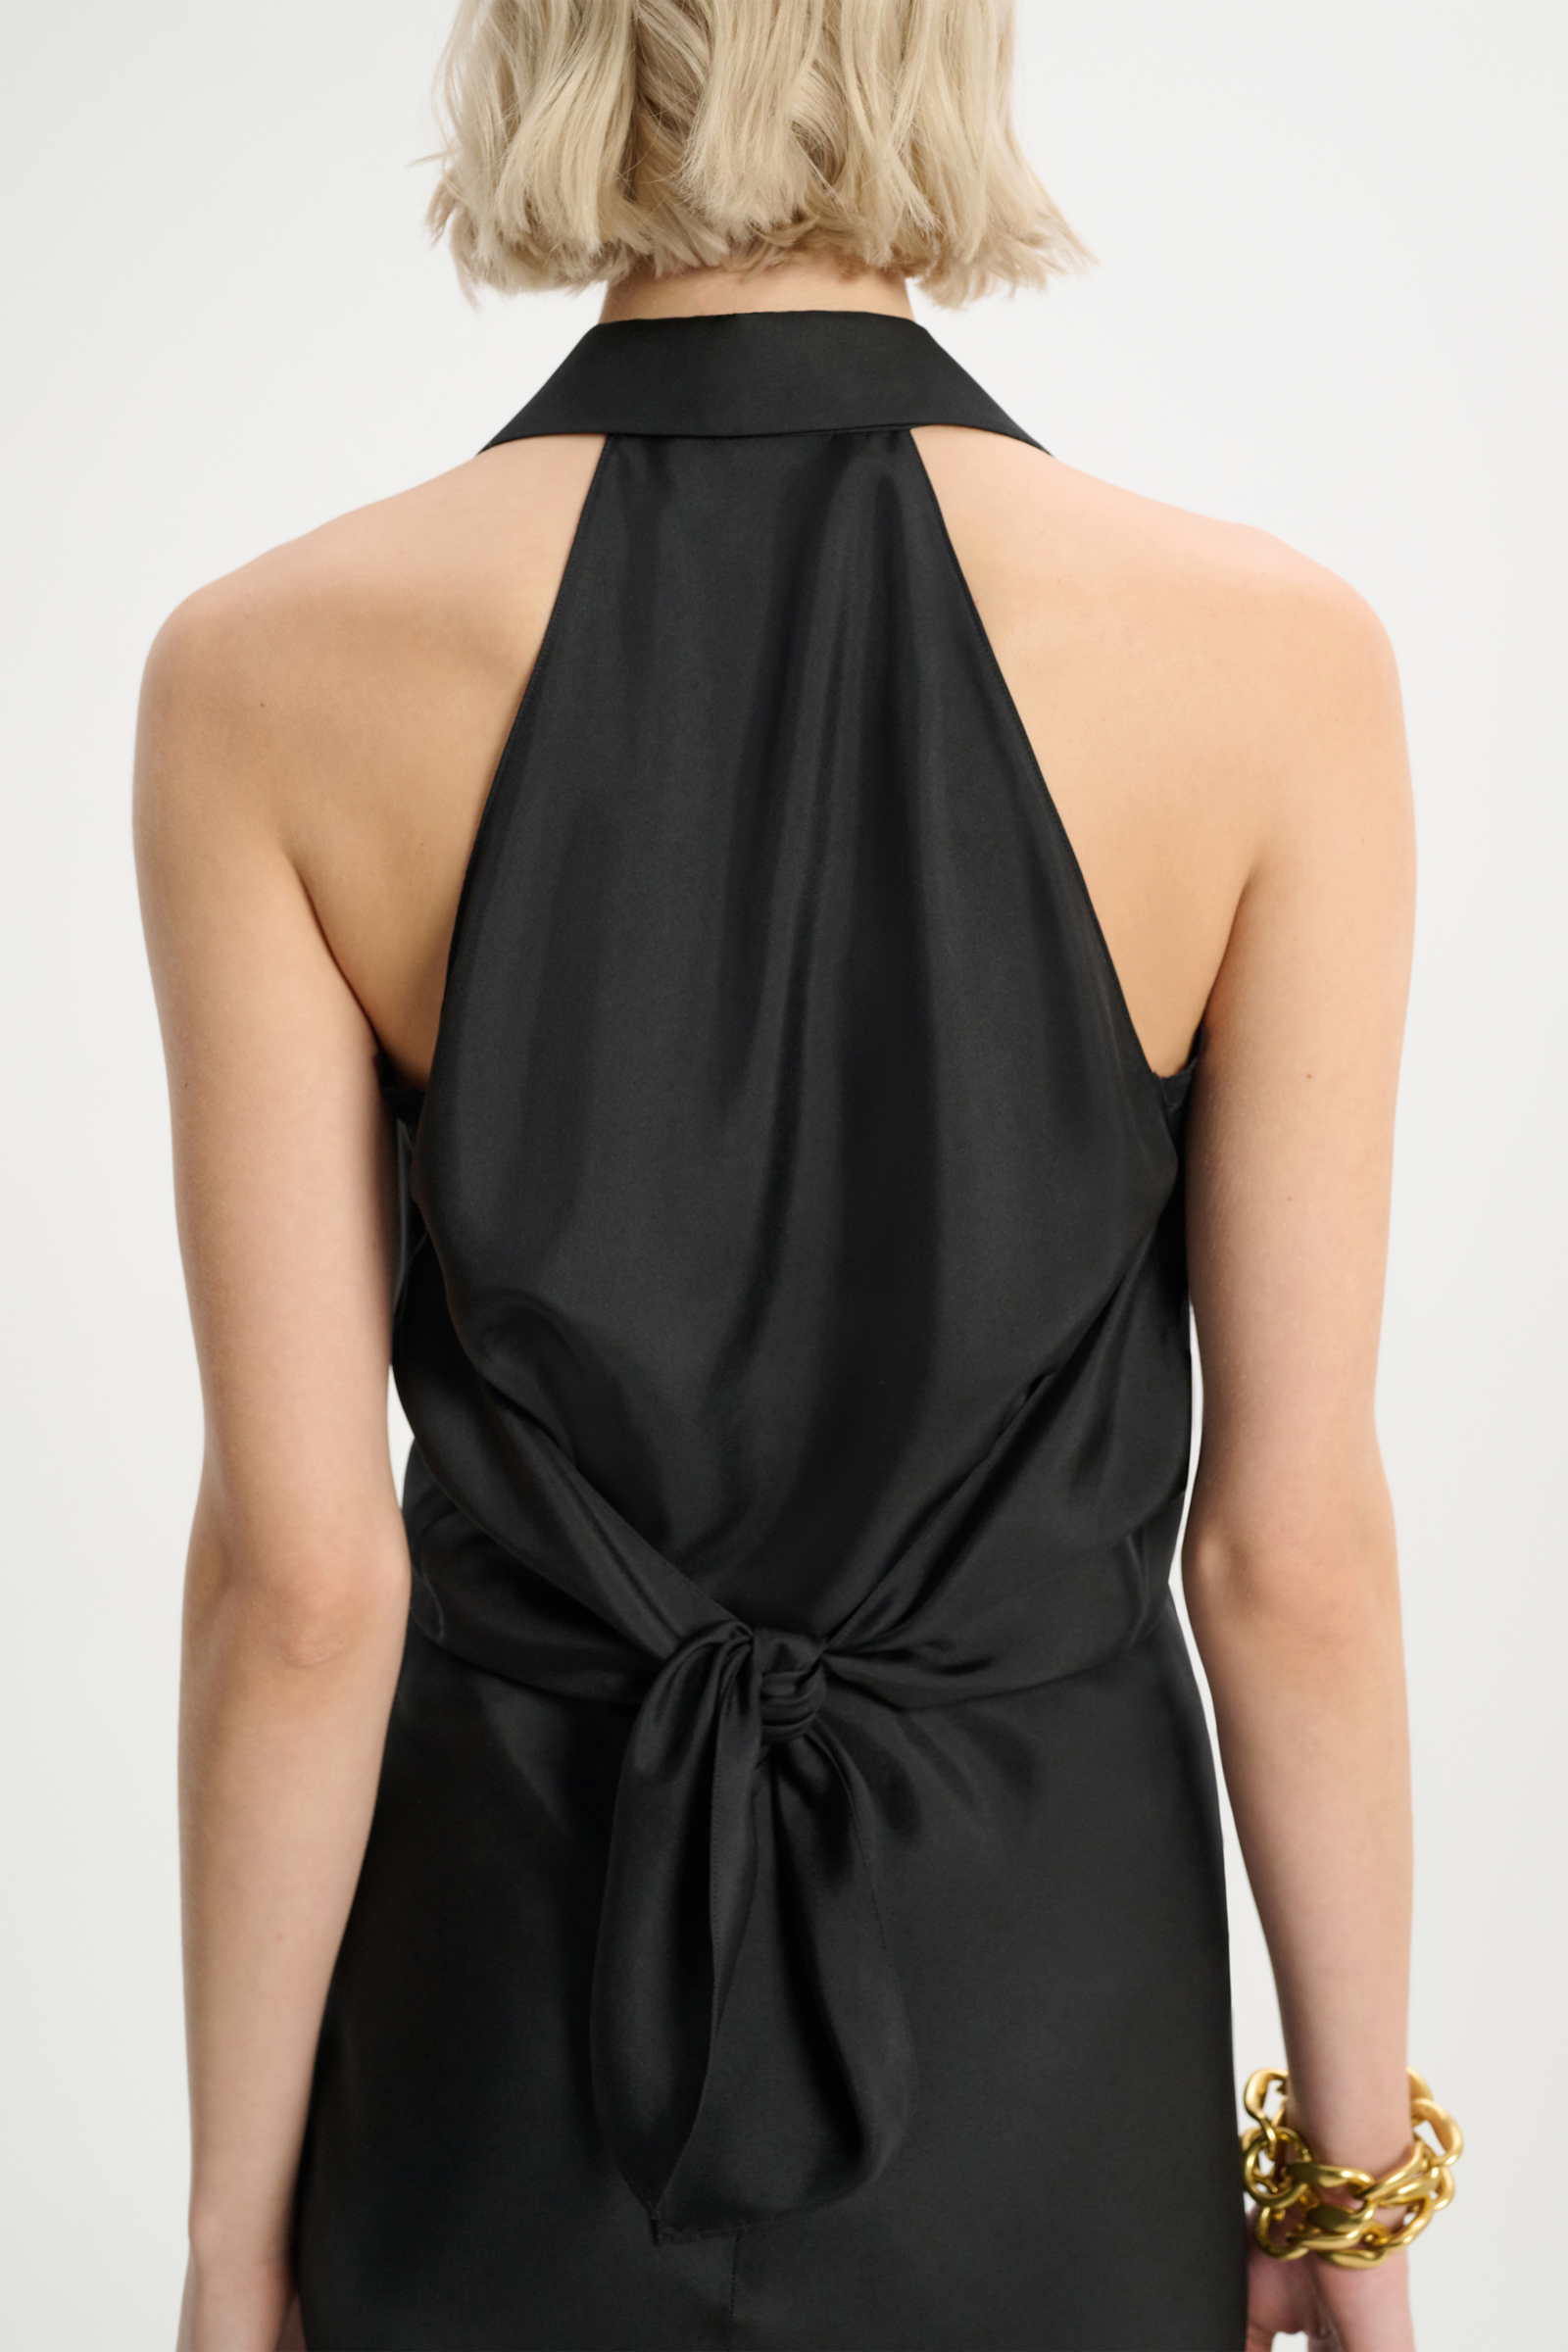 Dorothee Schumacher Silk twill vest-style top with lace details pure black